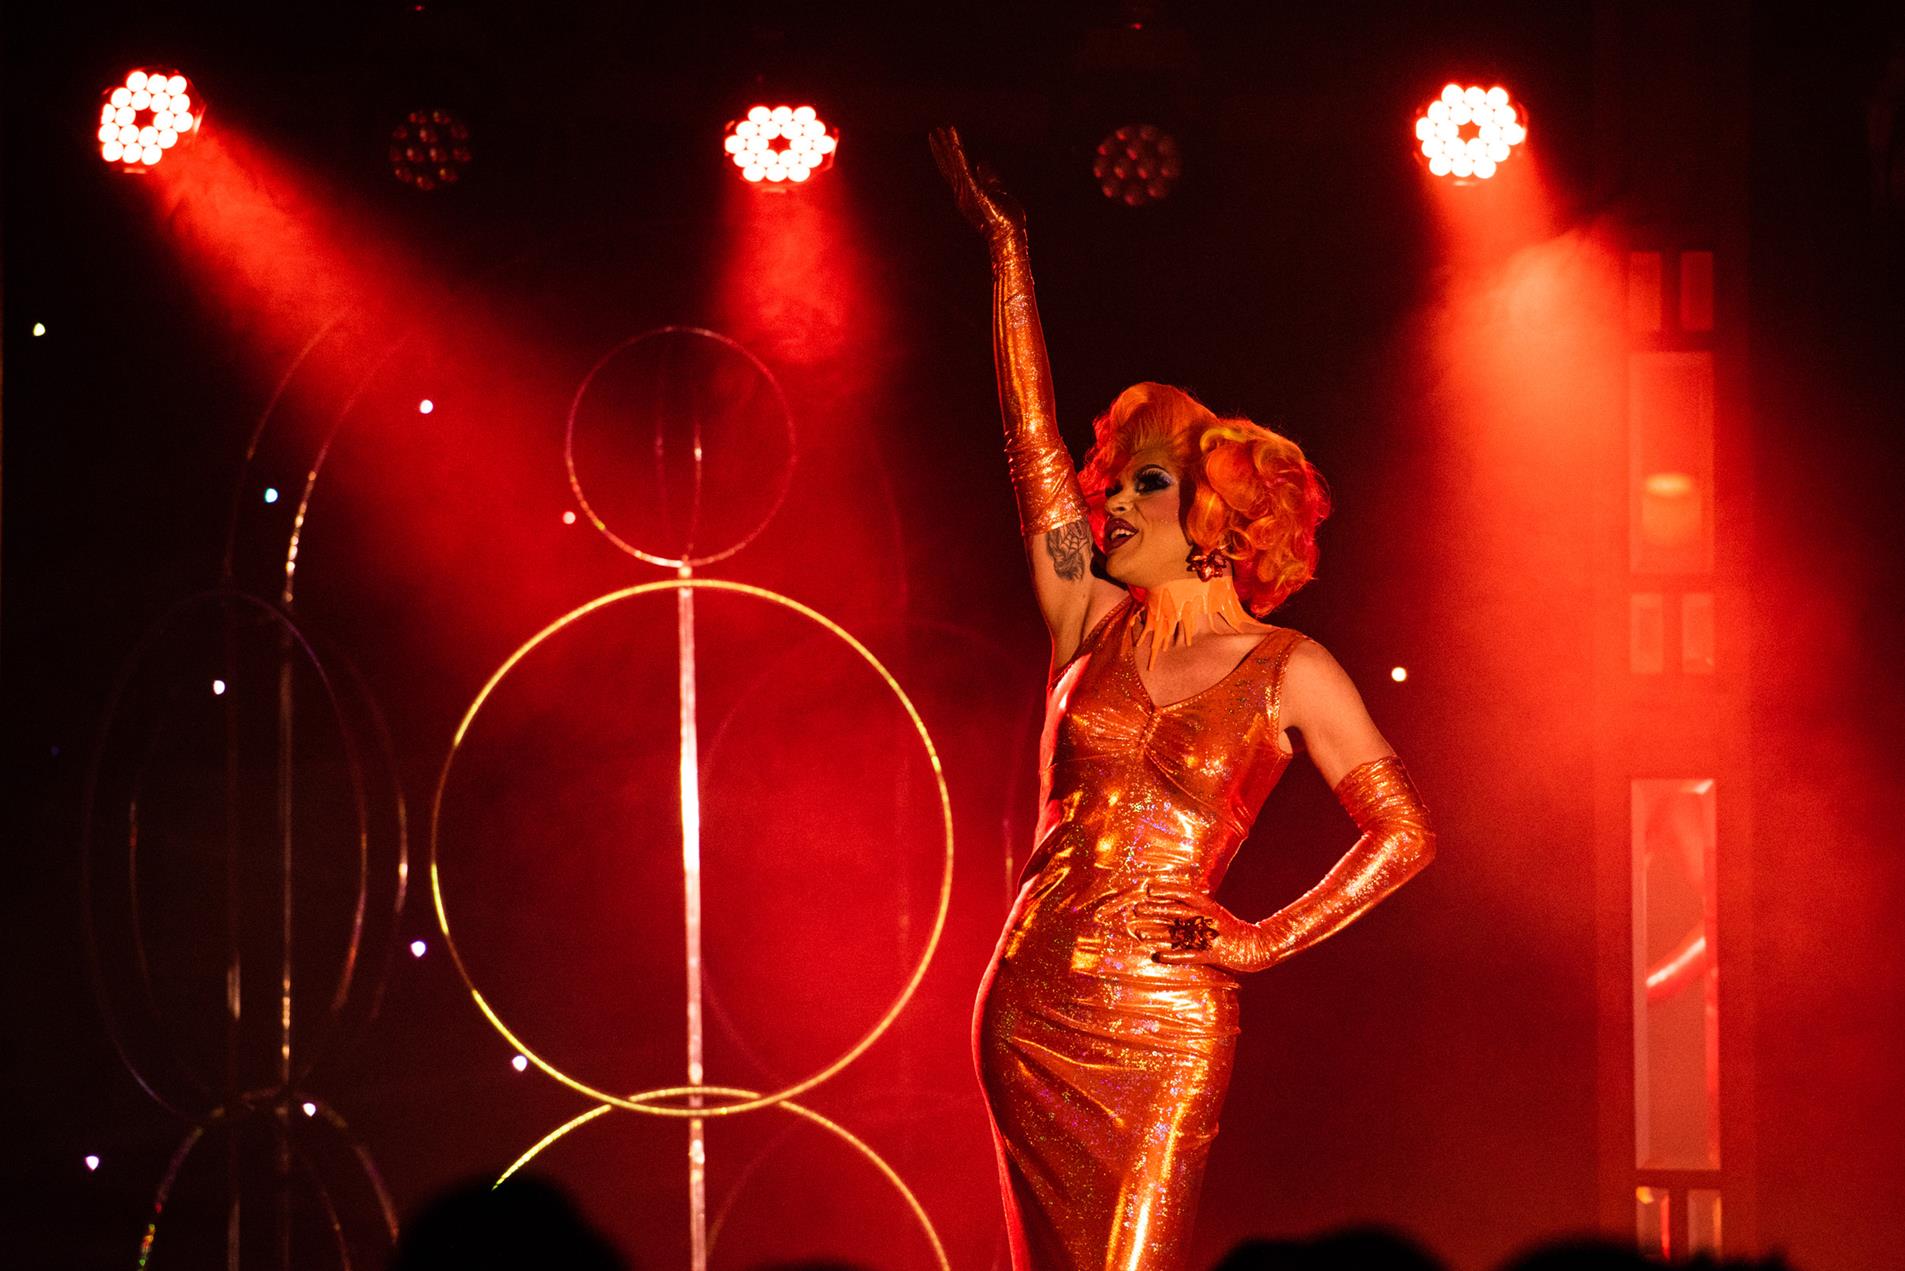 An artist wearing a vibrant orange dress performing onstage.